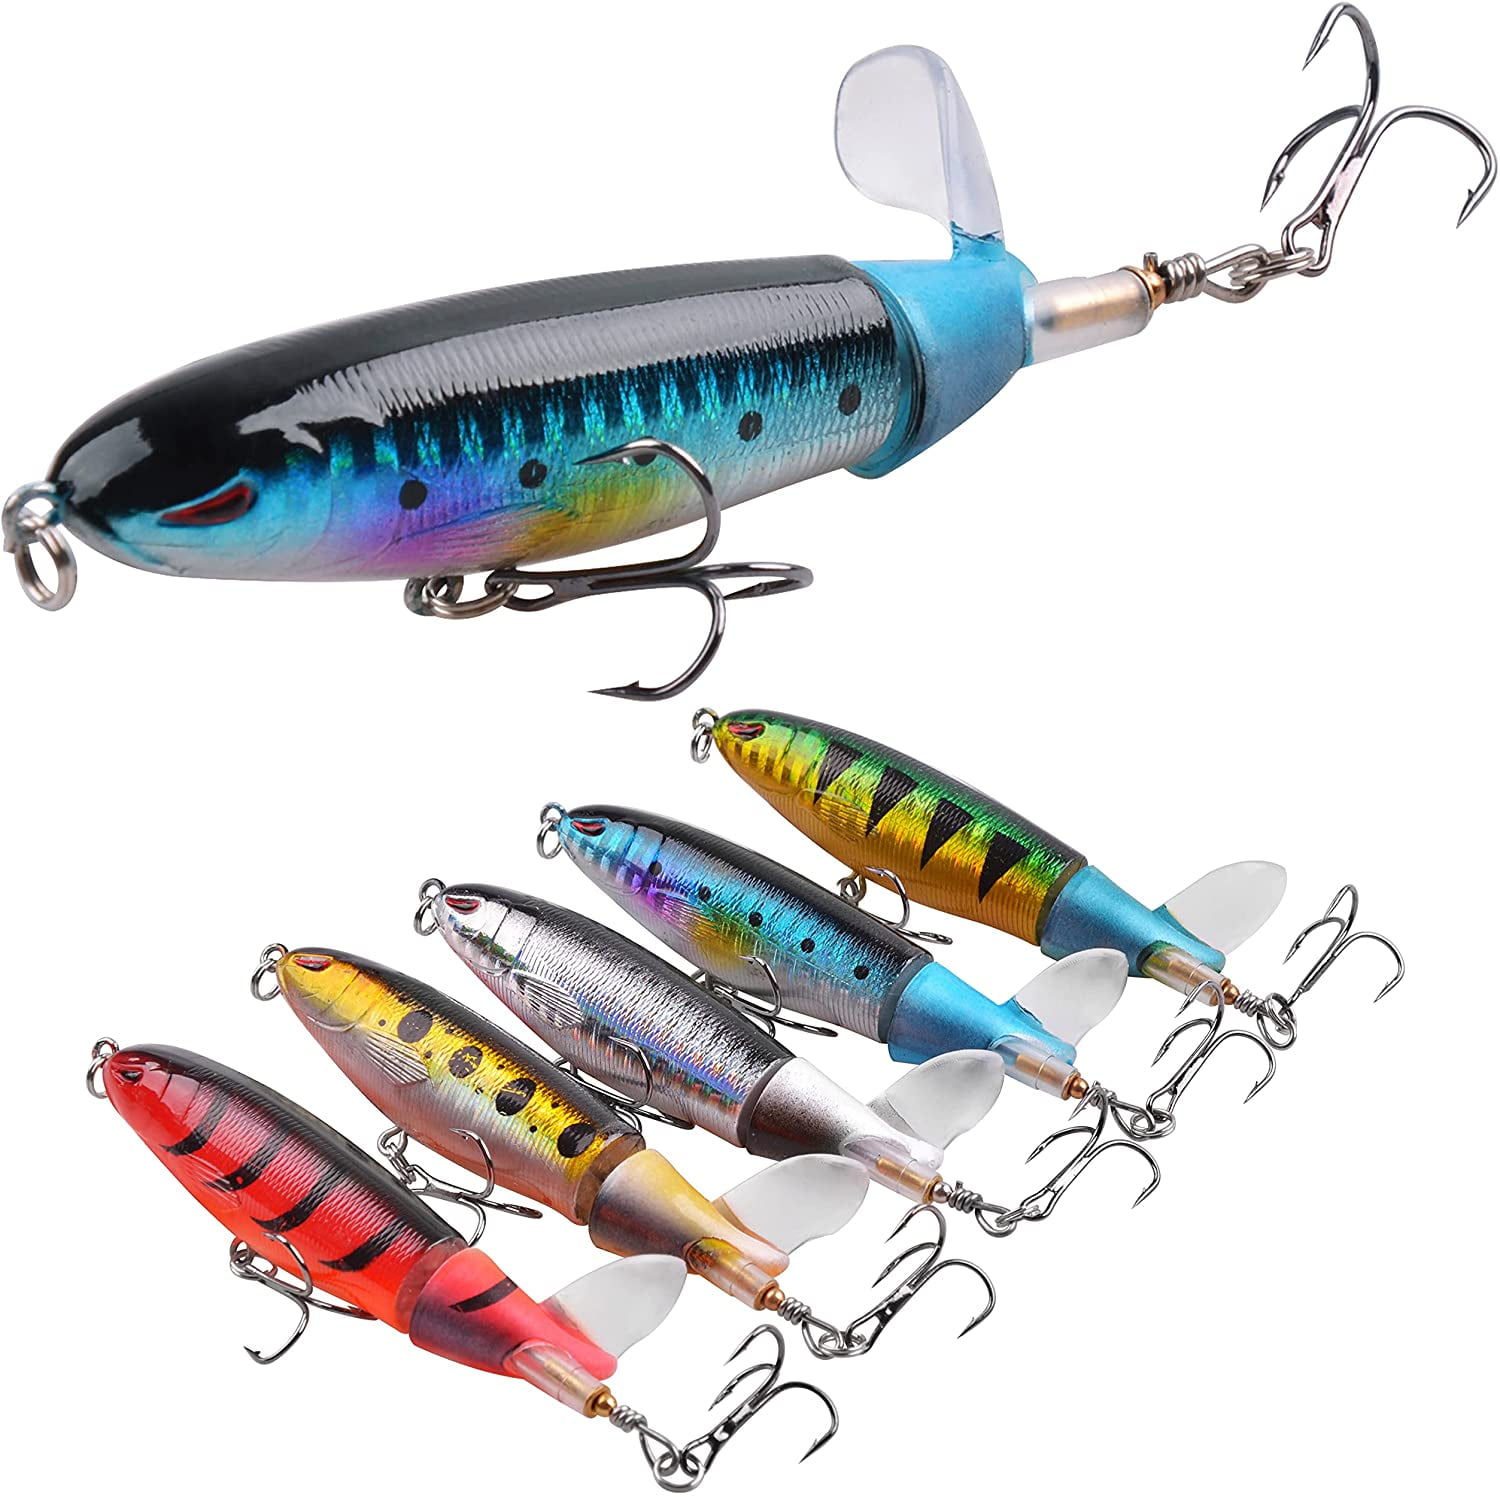 OROOTL Topwater Fishing Lures Set Bass Plopping Lures with